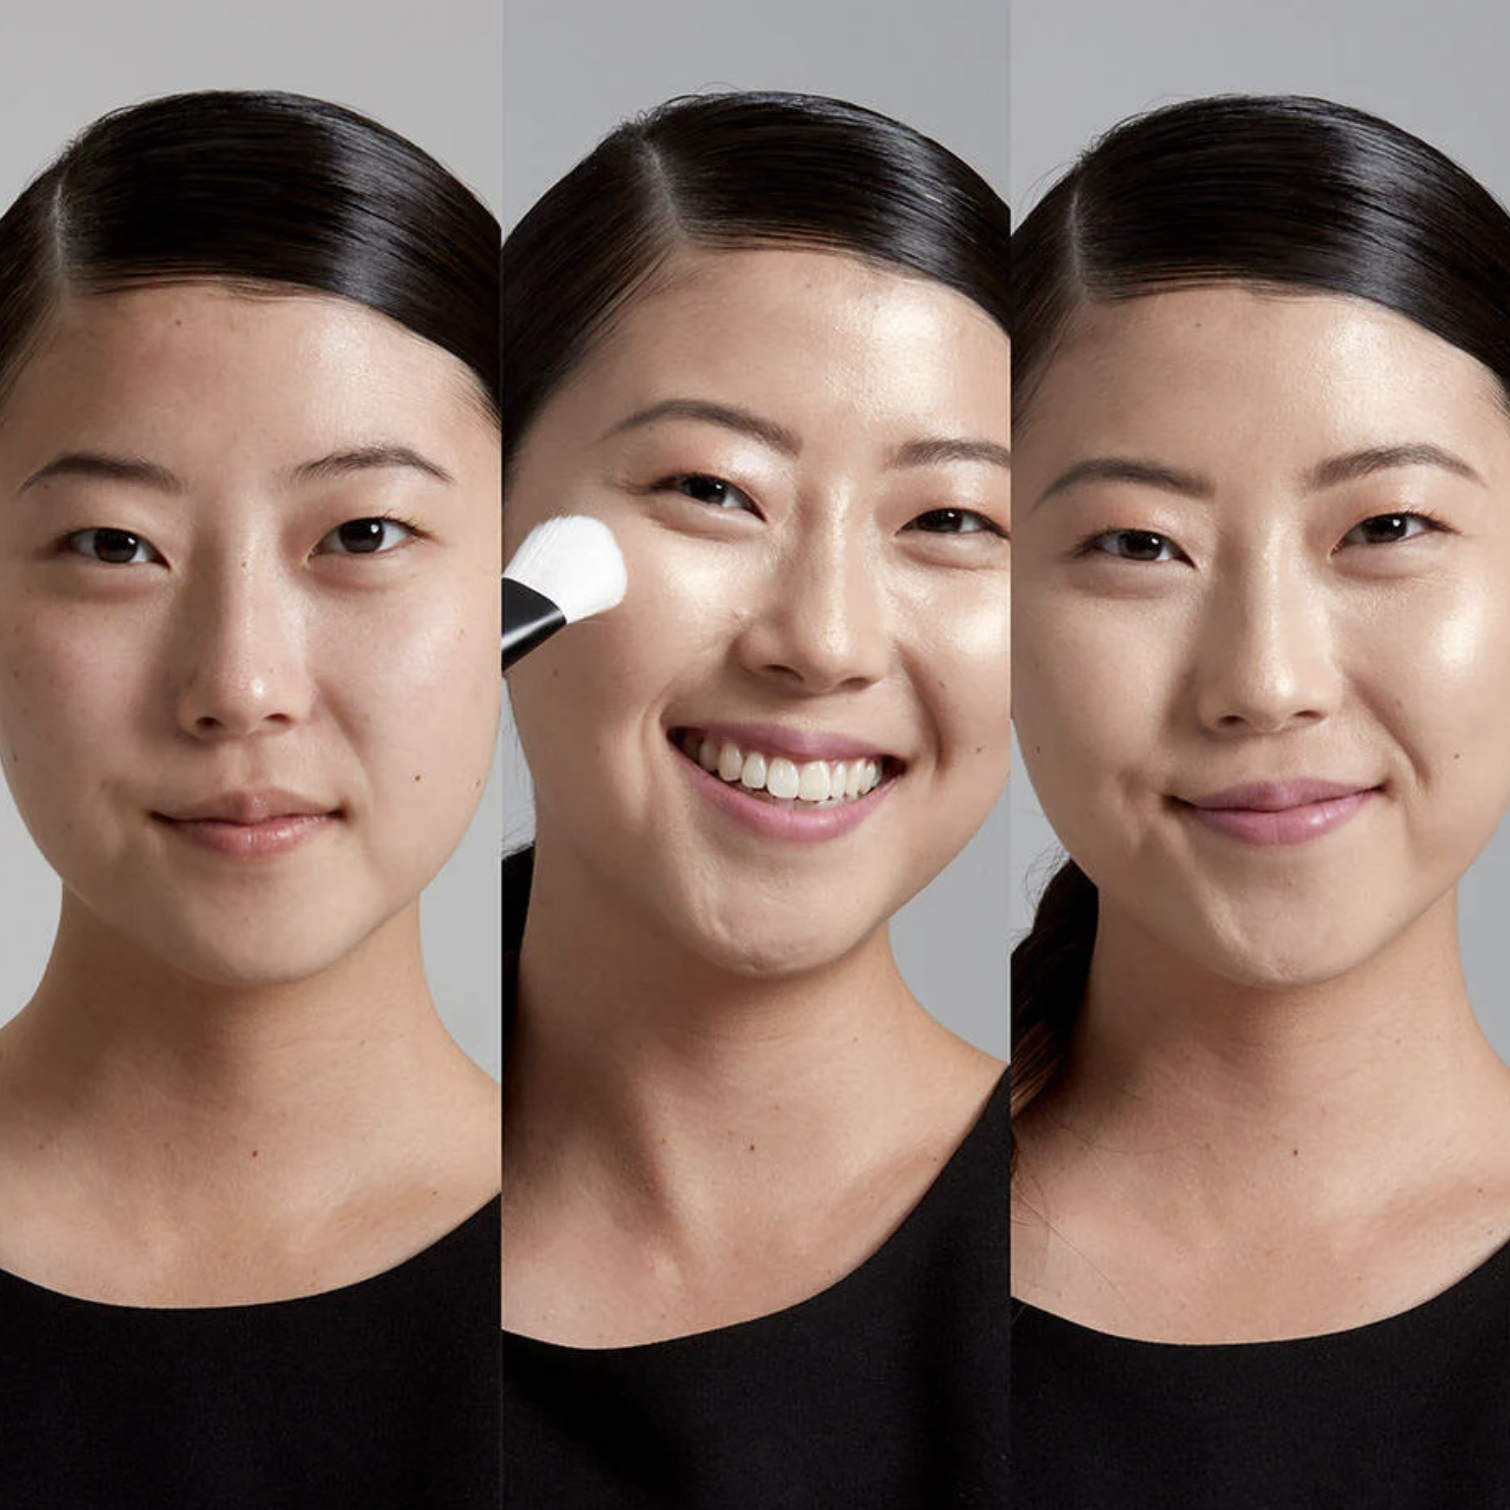 A person applying the powder and showing before and after using it